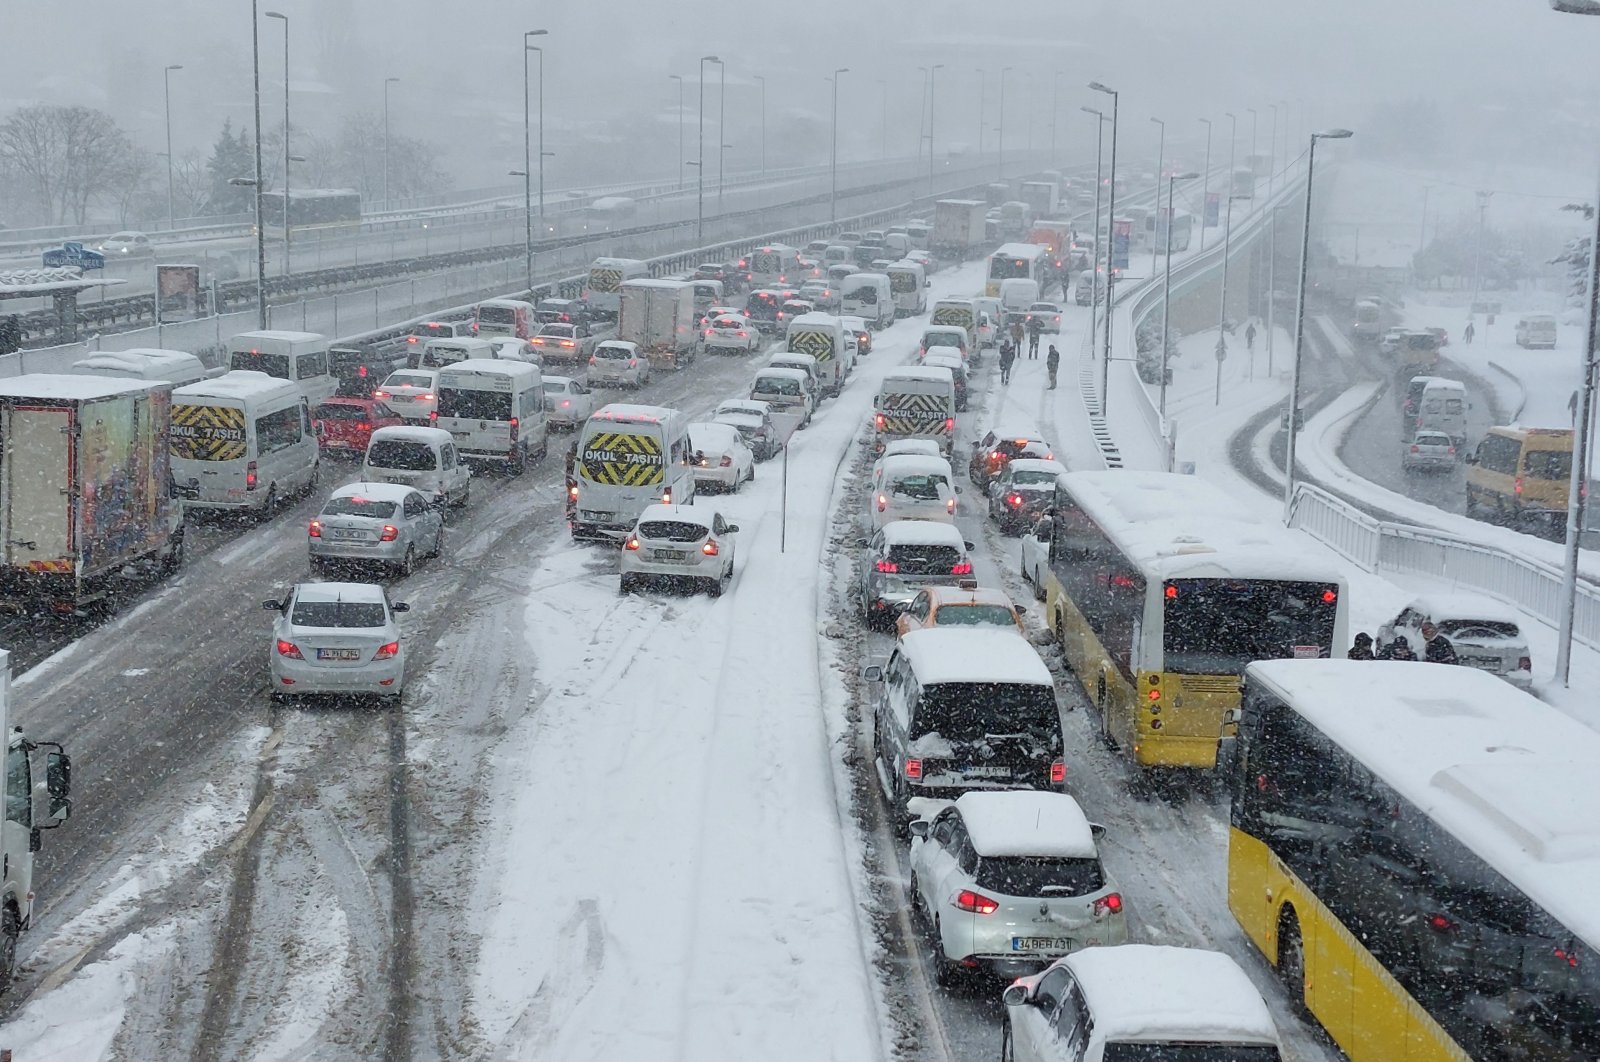 A view of traffic on the E-5 highway, in Istanbul, Turkey, March 11, 2022. (IHA PHOTO)